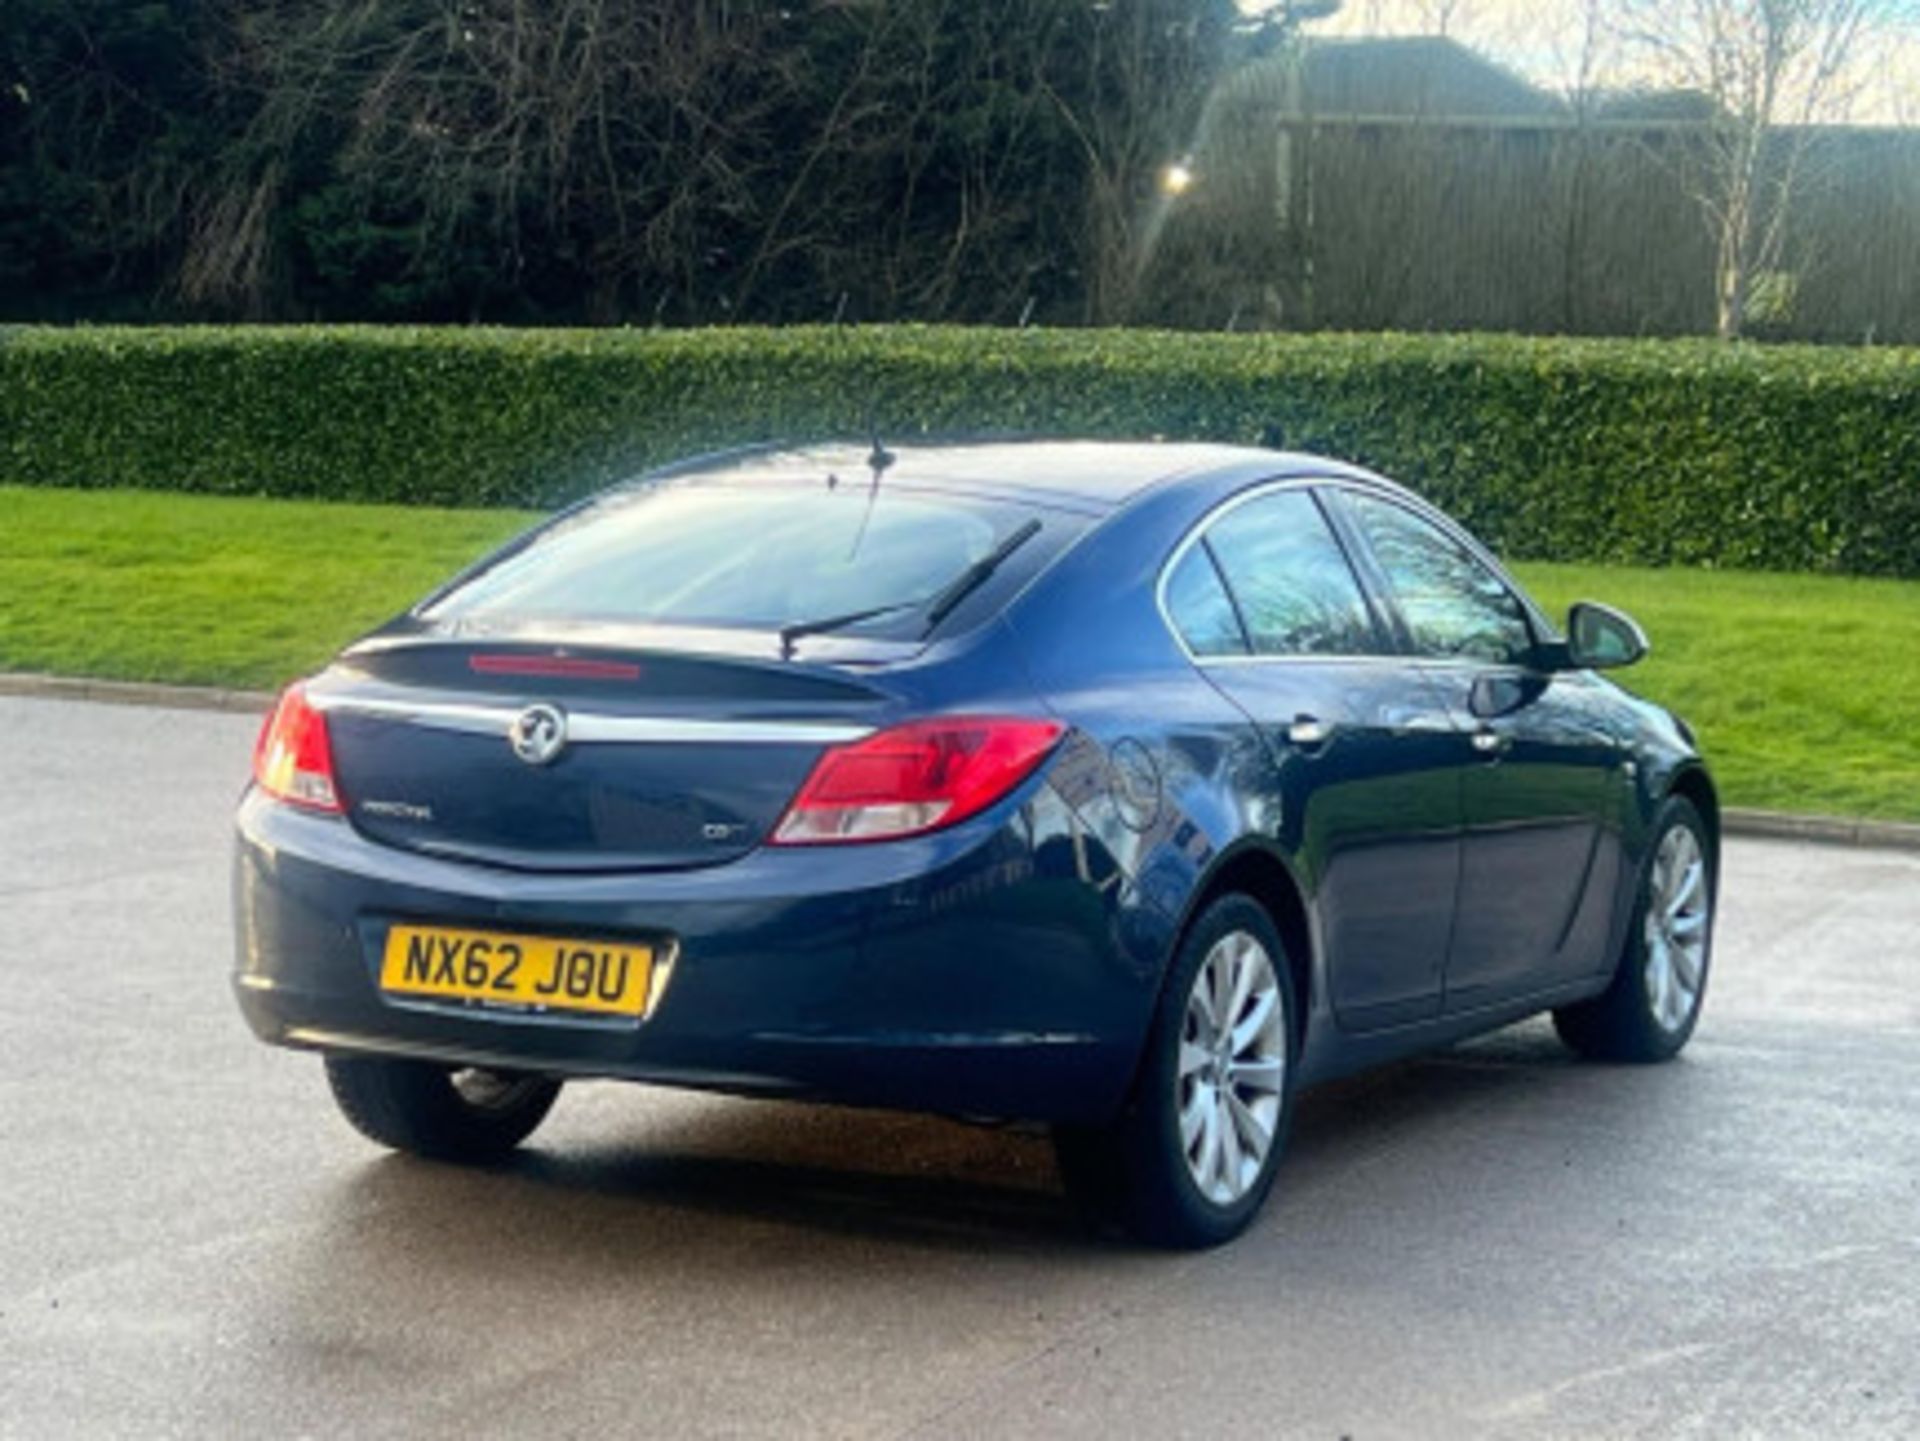 2012 VAUXHALL INSIGNIA 2.0 CDTI ELITE AUTO EURO 5 - DISCOVER EXCELLENCE >>--NO VAT ON HAMMER--<< - Image 31 of 79